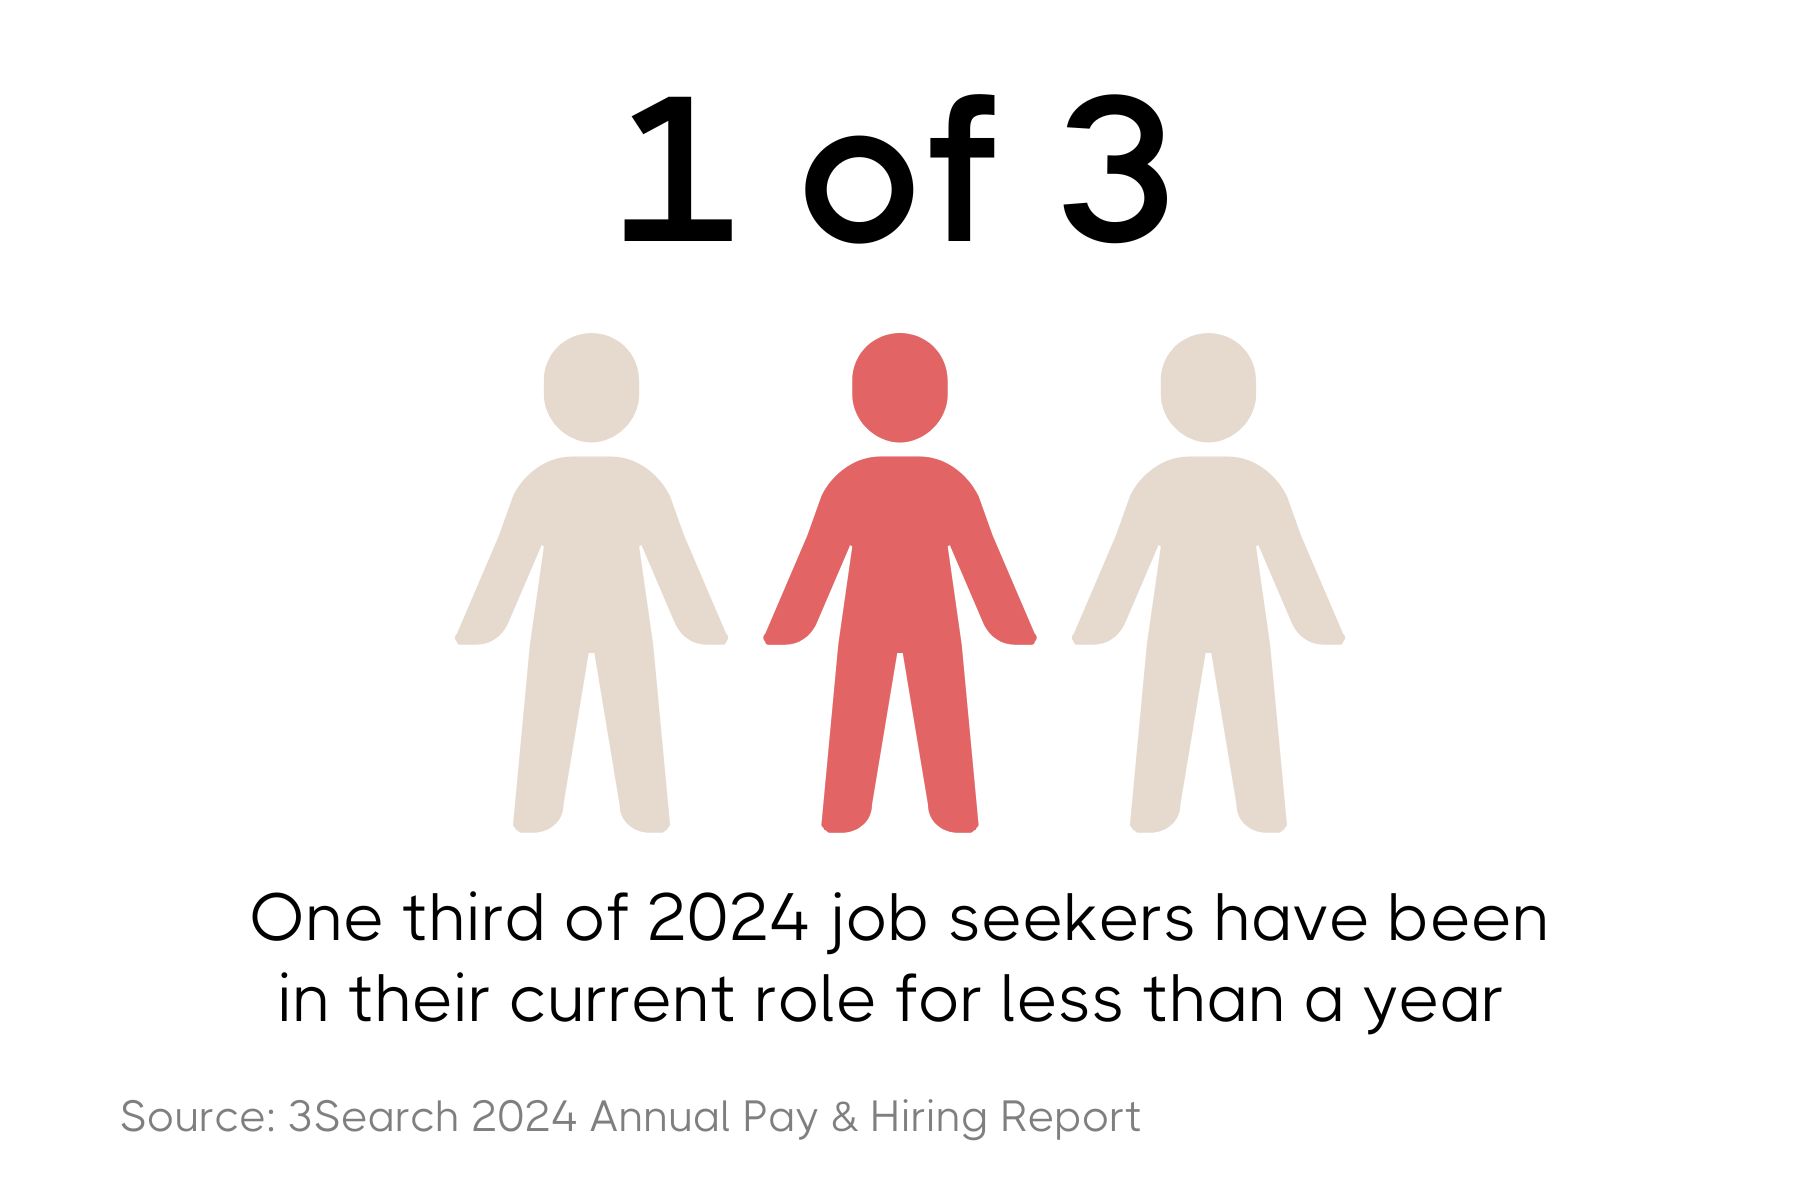 The top black text reads "1 of 3". Below that there are three people icons, the middle one is pink and the other two are cream colouresd. The text below reads: "One third of 2024 job seekers have been in their current role for less than a year", below that the grey text reads: "Source: 3Search 2024 Annual Pay & Hiring Report"